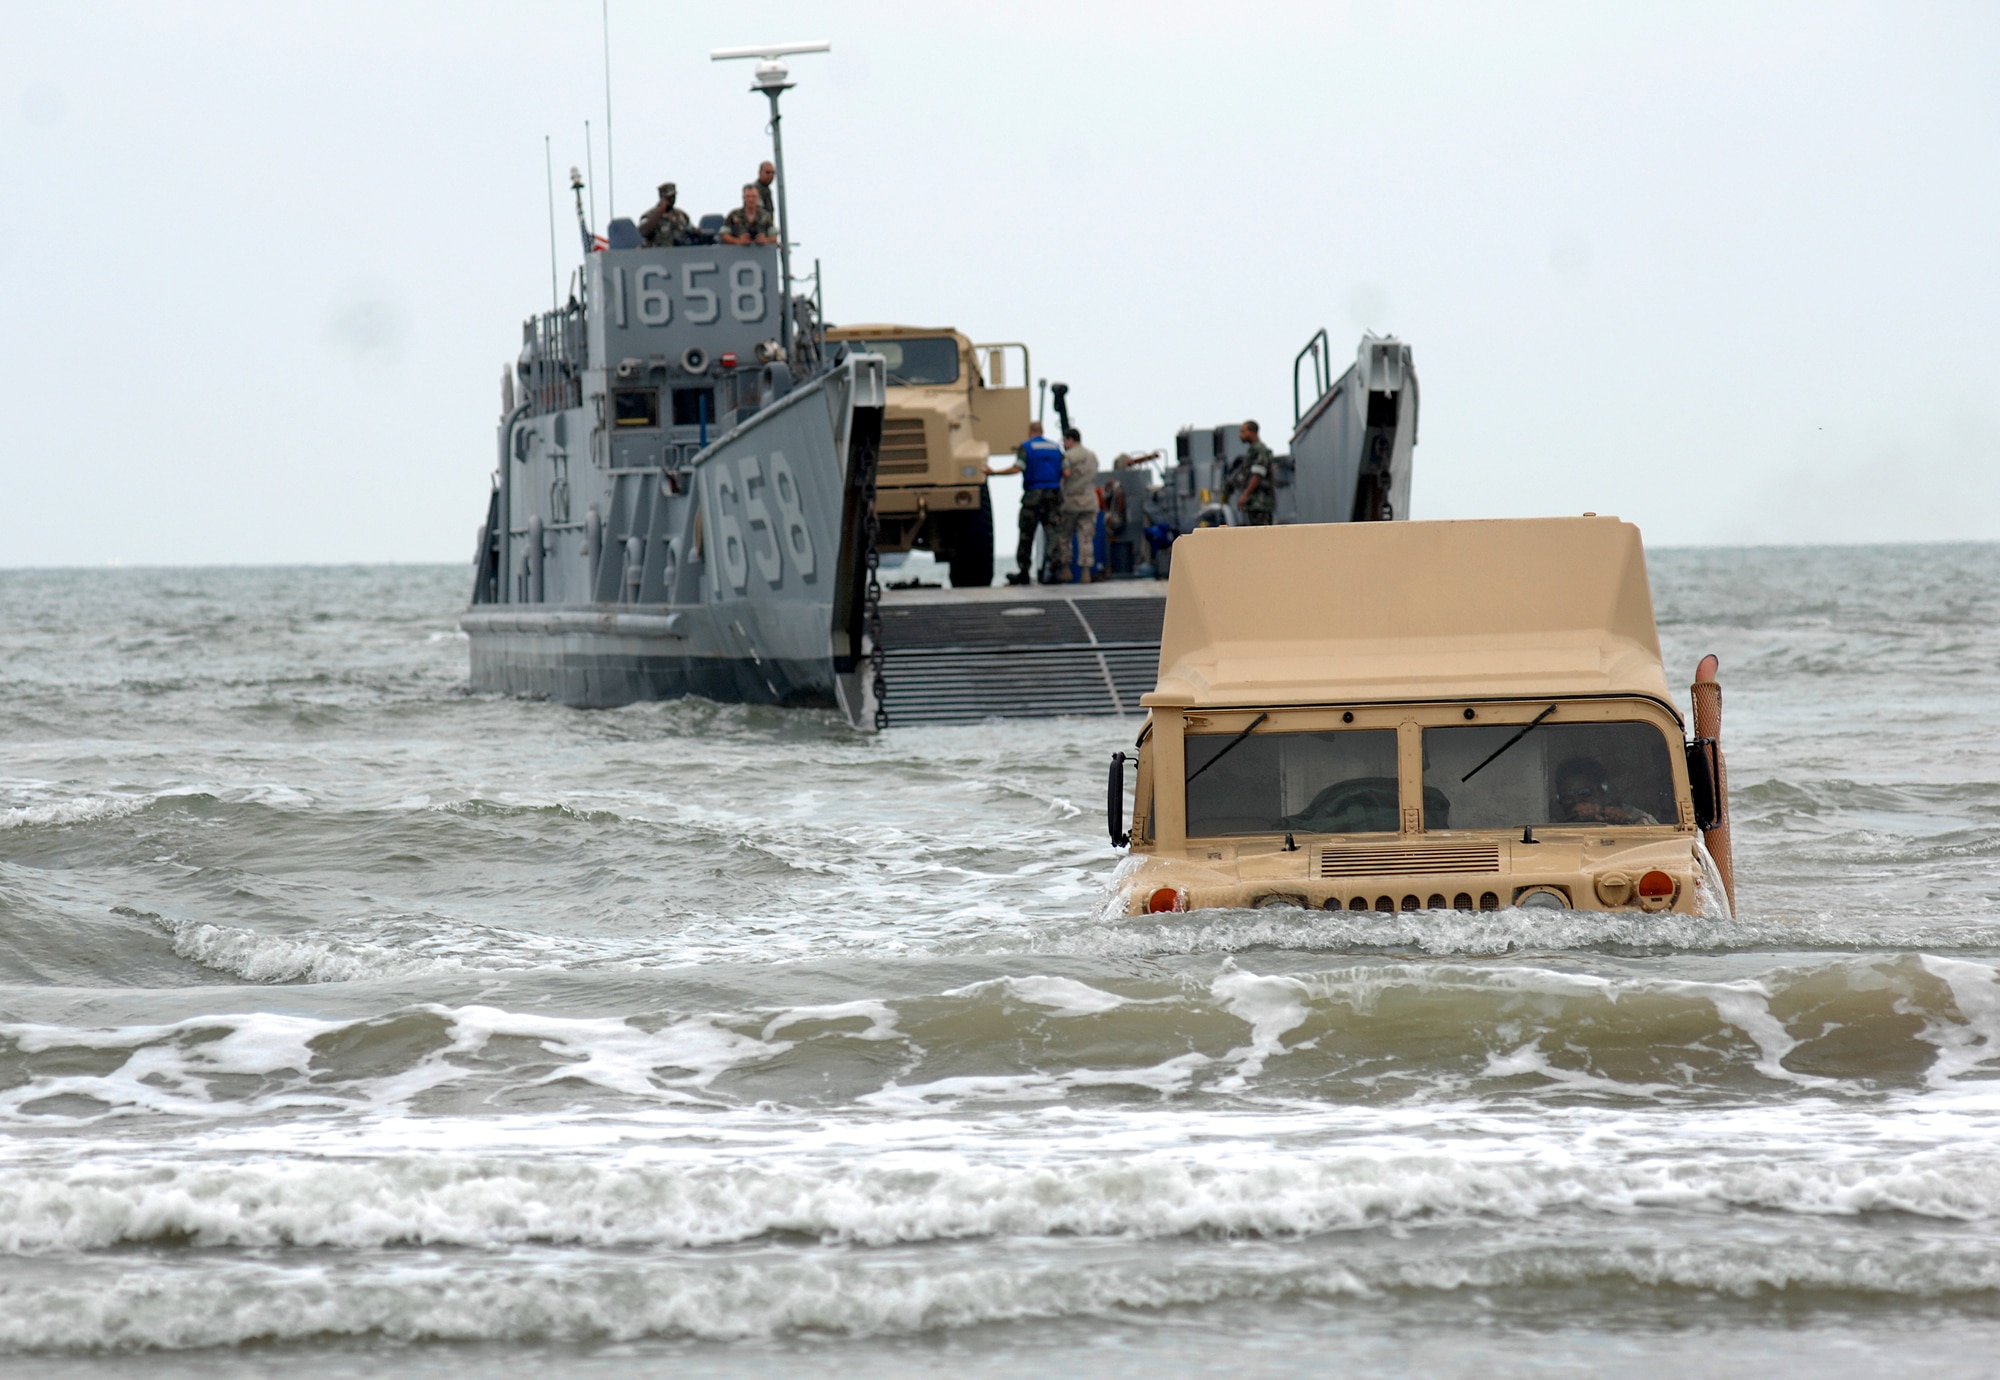 A high mobility multipurpose wheeled vehicle or Humvee exits from an utility landing craft Sept. 18 on the beach near Galveston, Texas. The Humvee was from the amphibious assault ship USS Nassau anchored off Galveston to provide disaster response and aid to civil authorities as directed in the wake of Hurricane Ike.  (U.S. Air Force photo/Staff Sgt. Bennie J. Davis III)